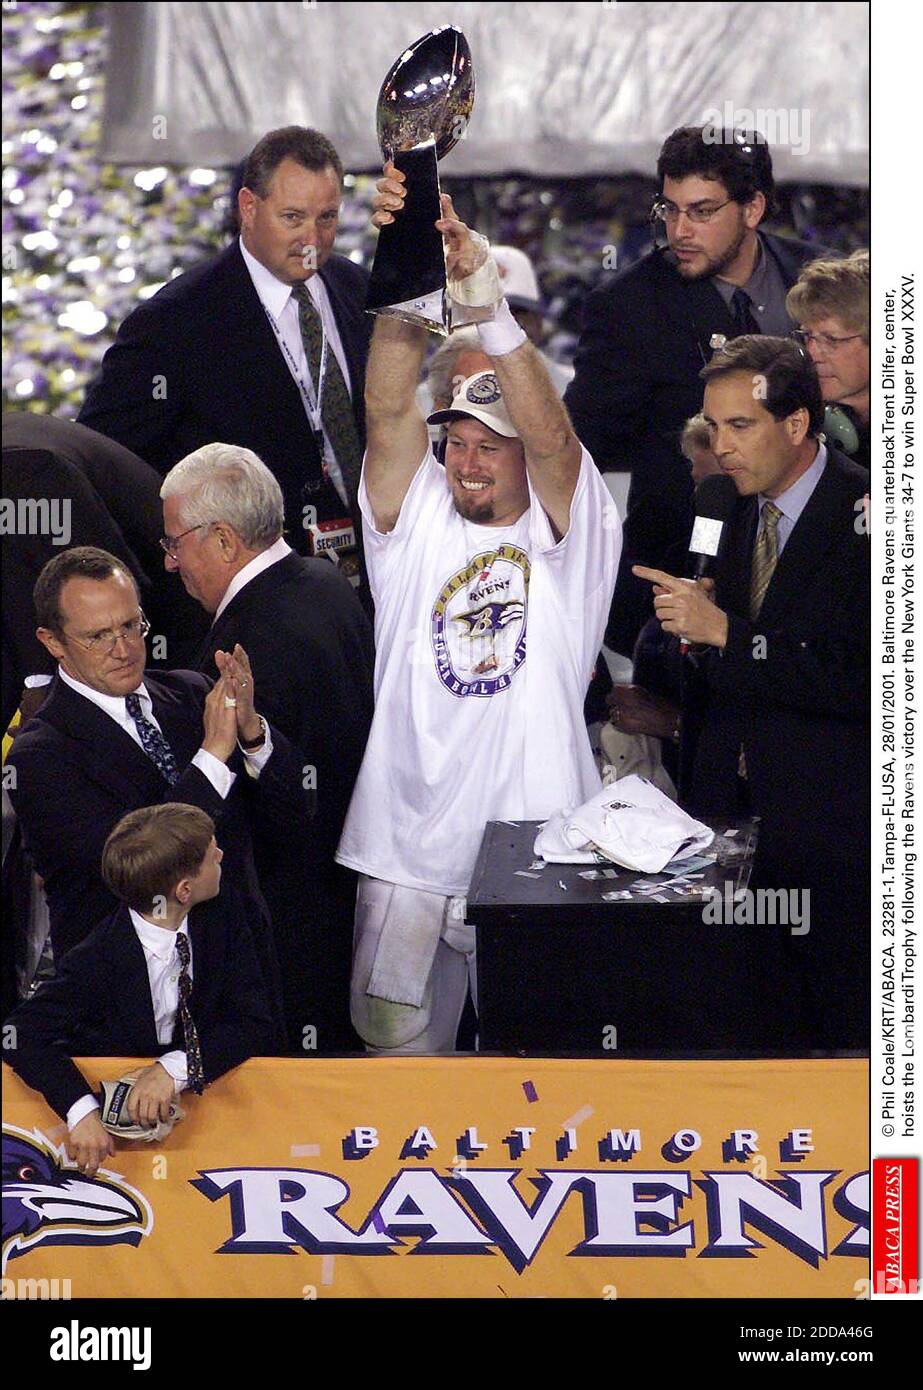 NO FILM, NO VIDEO, NO TV, NO DOCUMENTARY - © Phil Coale/KRT/ABACA. 23281-1.  Tampa-FL-USA, 28/01/2001. Baltimore Ravens quarterback Trent Dilfer,  center, hoists the Lombardi Trophy following the Ravens victory over the New